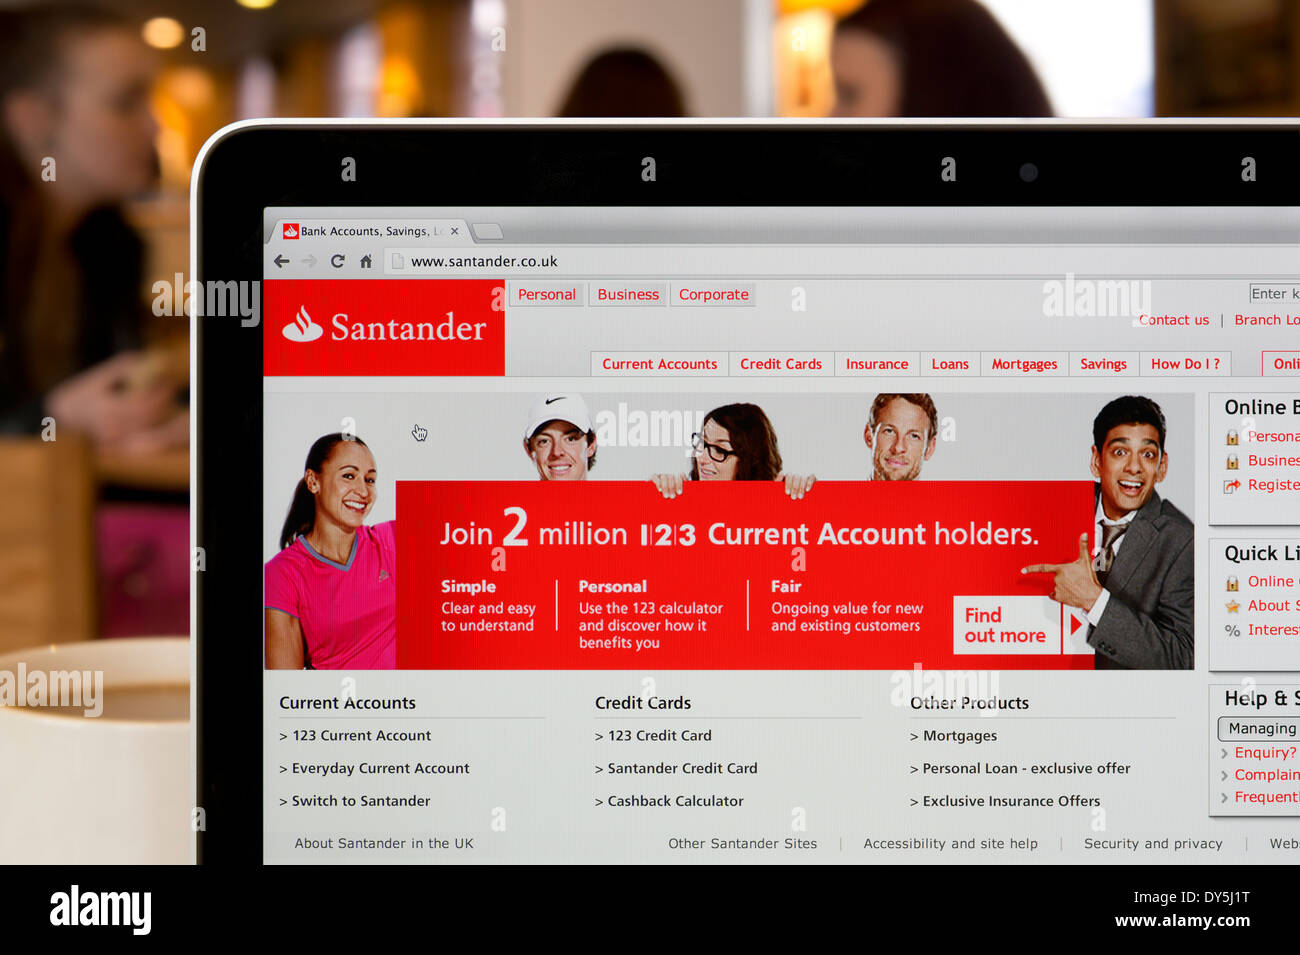 The Sanatander website shot in a coffee shop environment (Editorial use only: print, TV, e-book and editorial website). Stock Photo